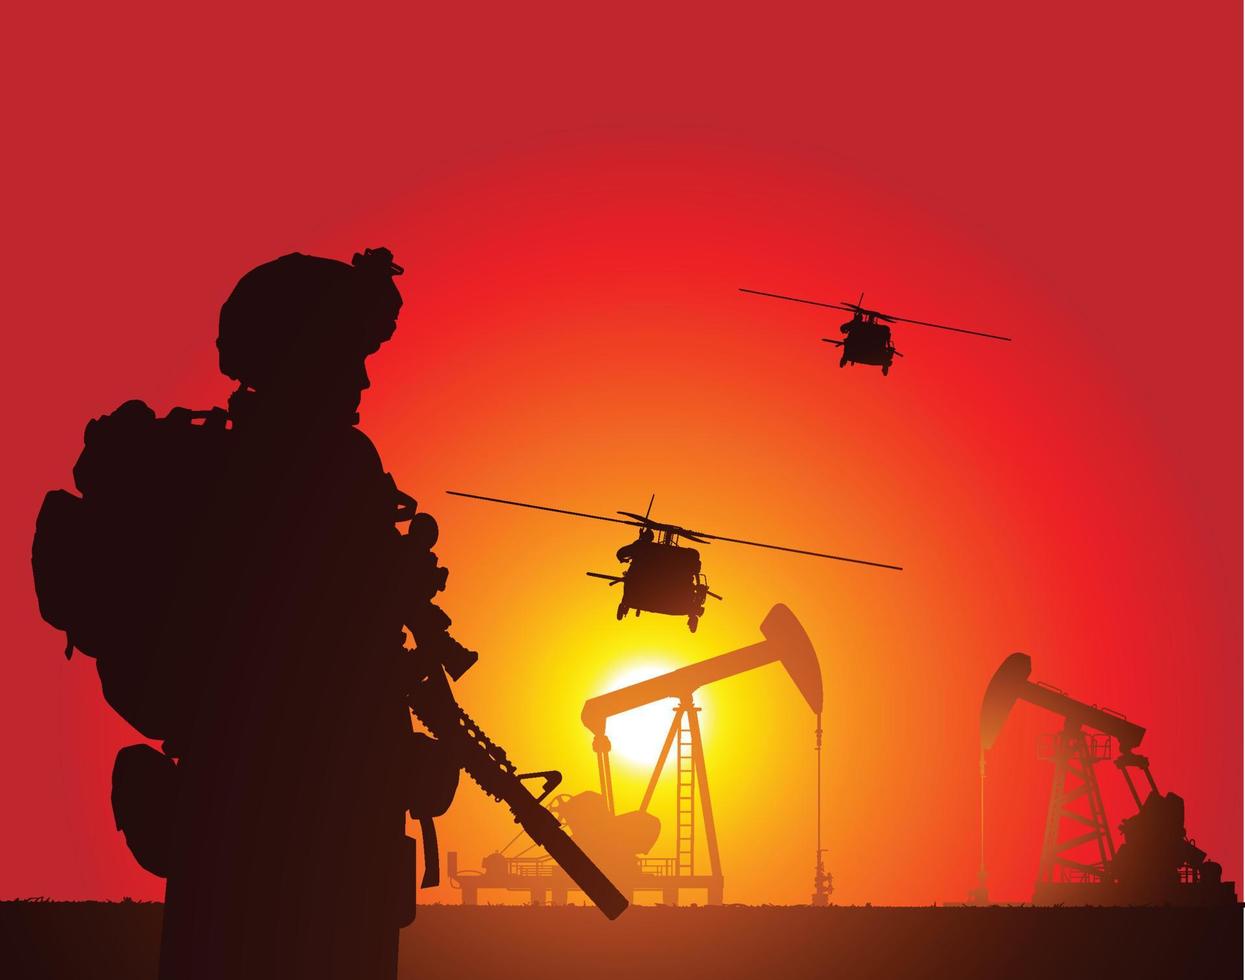 the silhouette of Soldiers waiting for helicopters vector